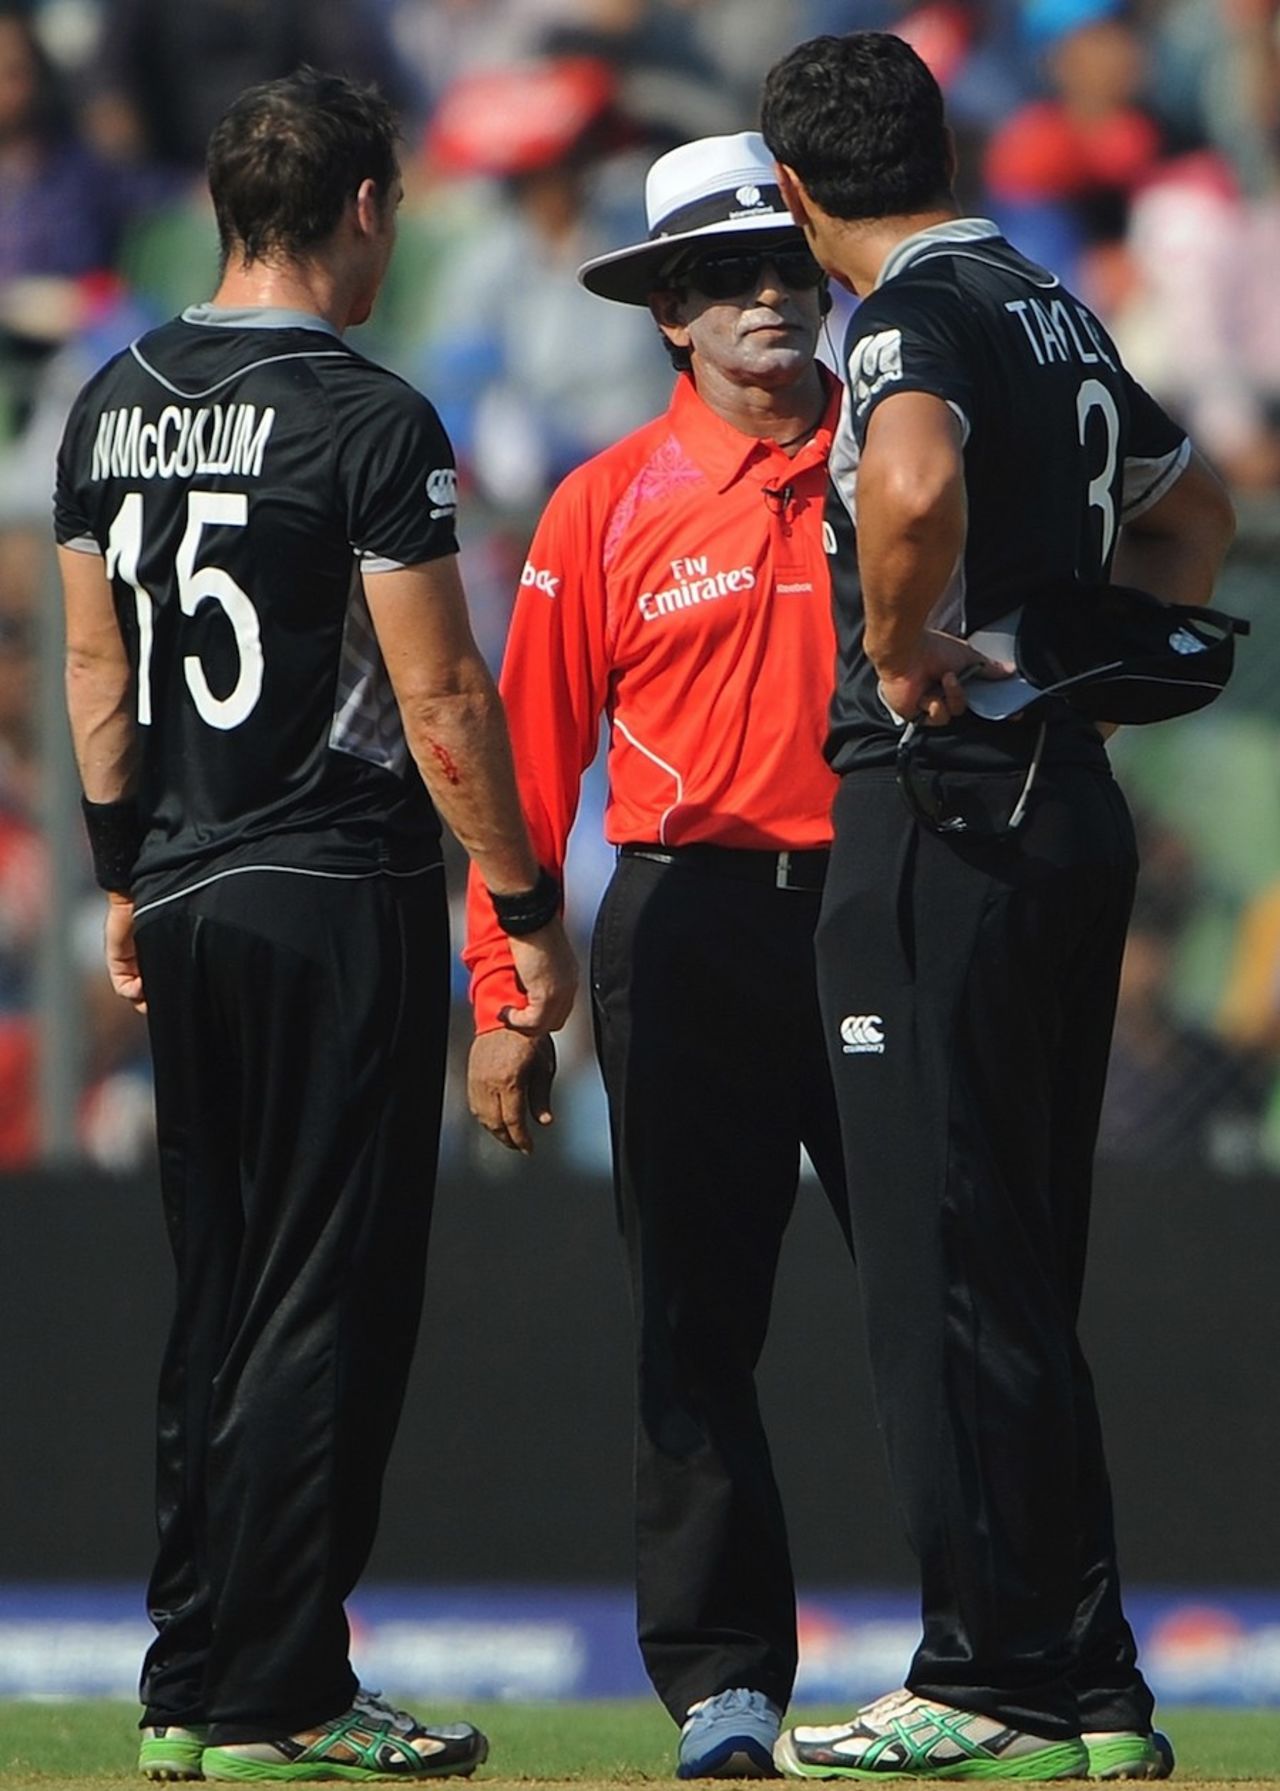 Ross Taylor and Nathan McCullum speak with umpire Asad Rauf, New Zealand v Sri Lanka, Group A, World Cup 2011, Mumbai, March 18, 2011